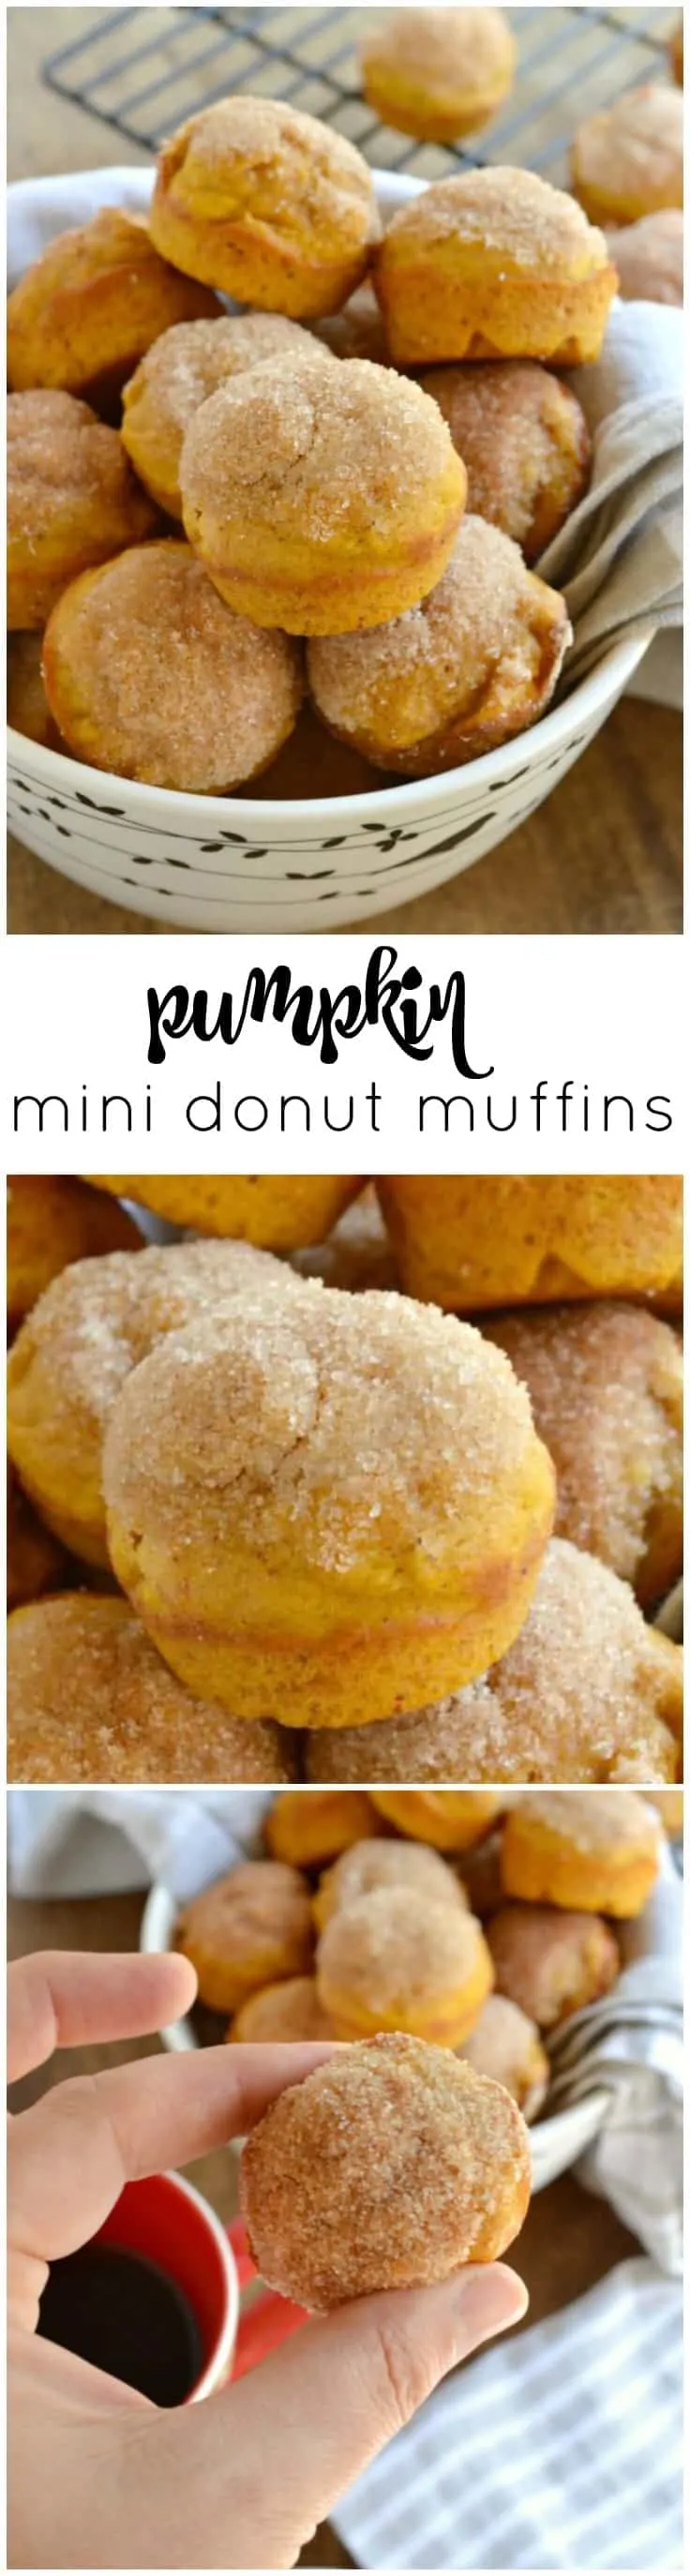 These Pumpkin Mini Donut Muffins are like baked donut holes that are brushed with butter and dipped in cinnamon sugar!